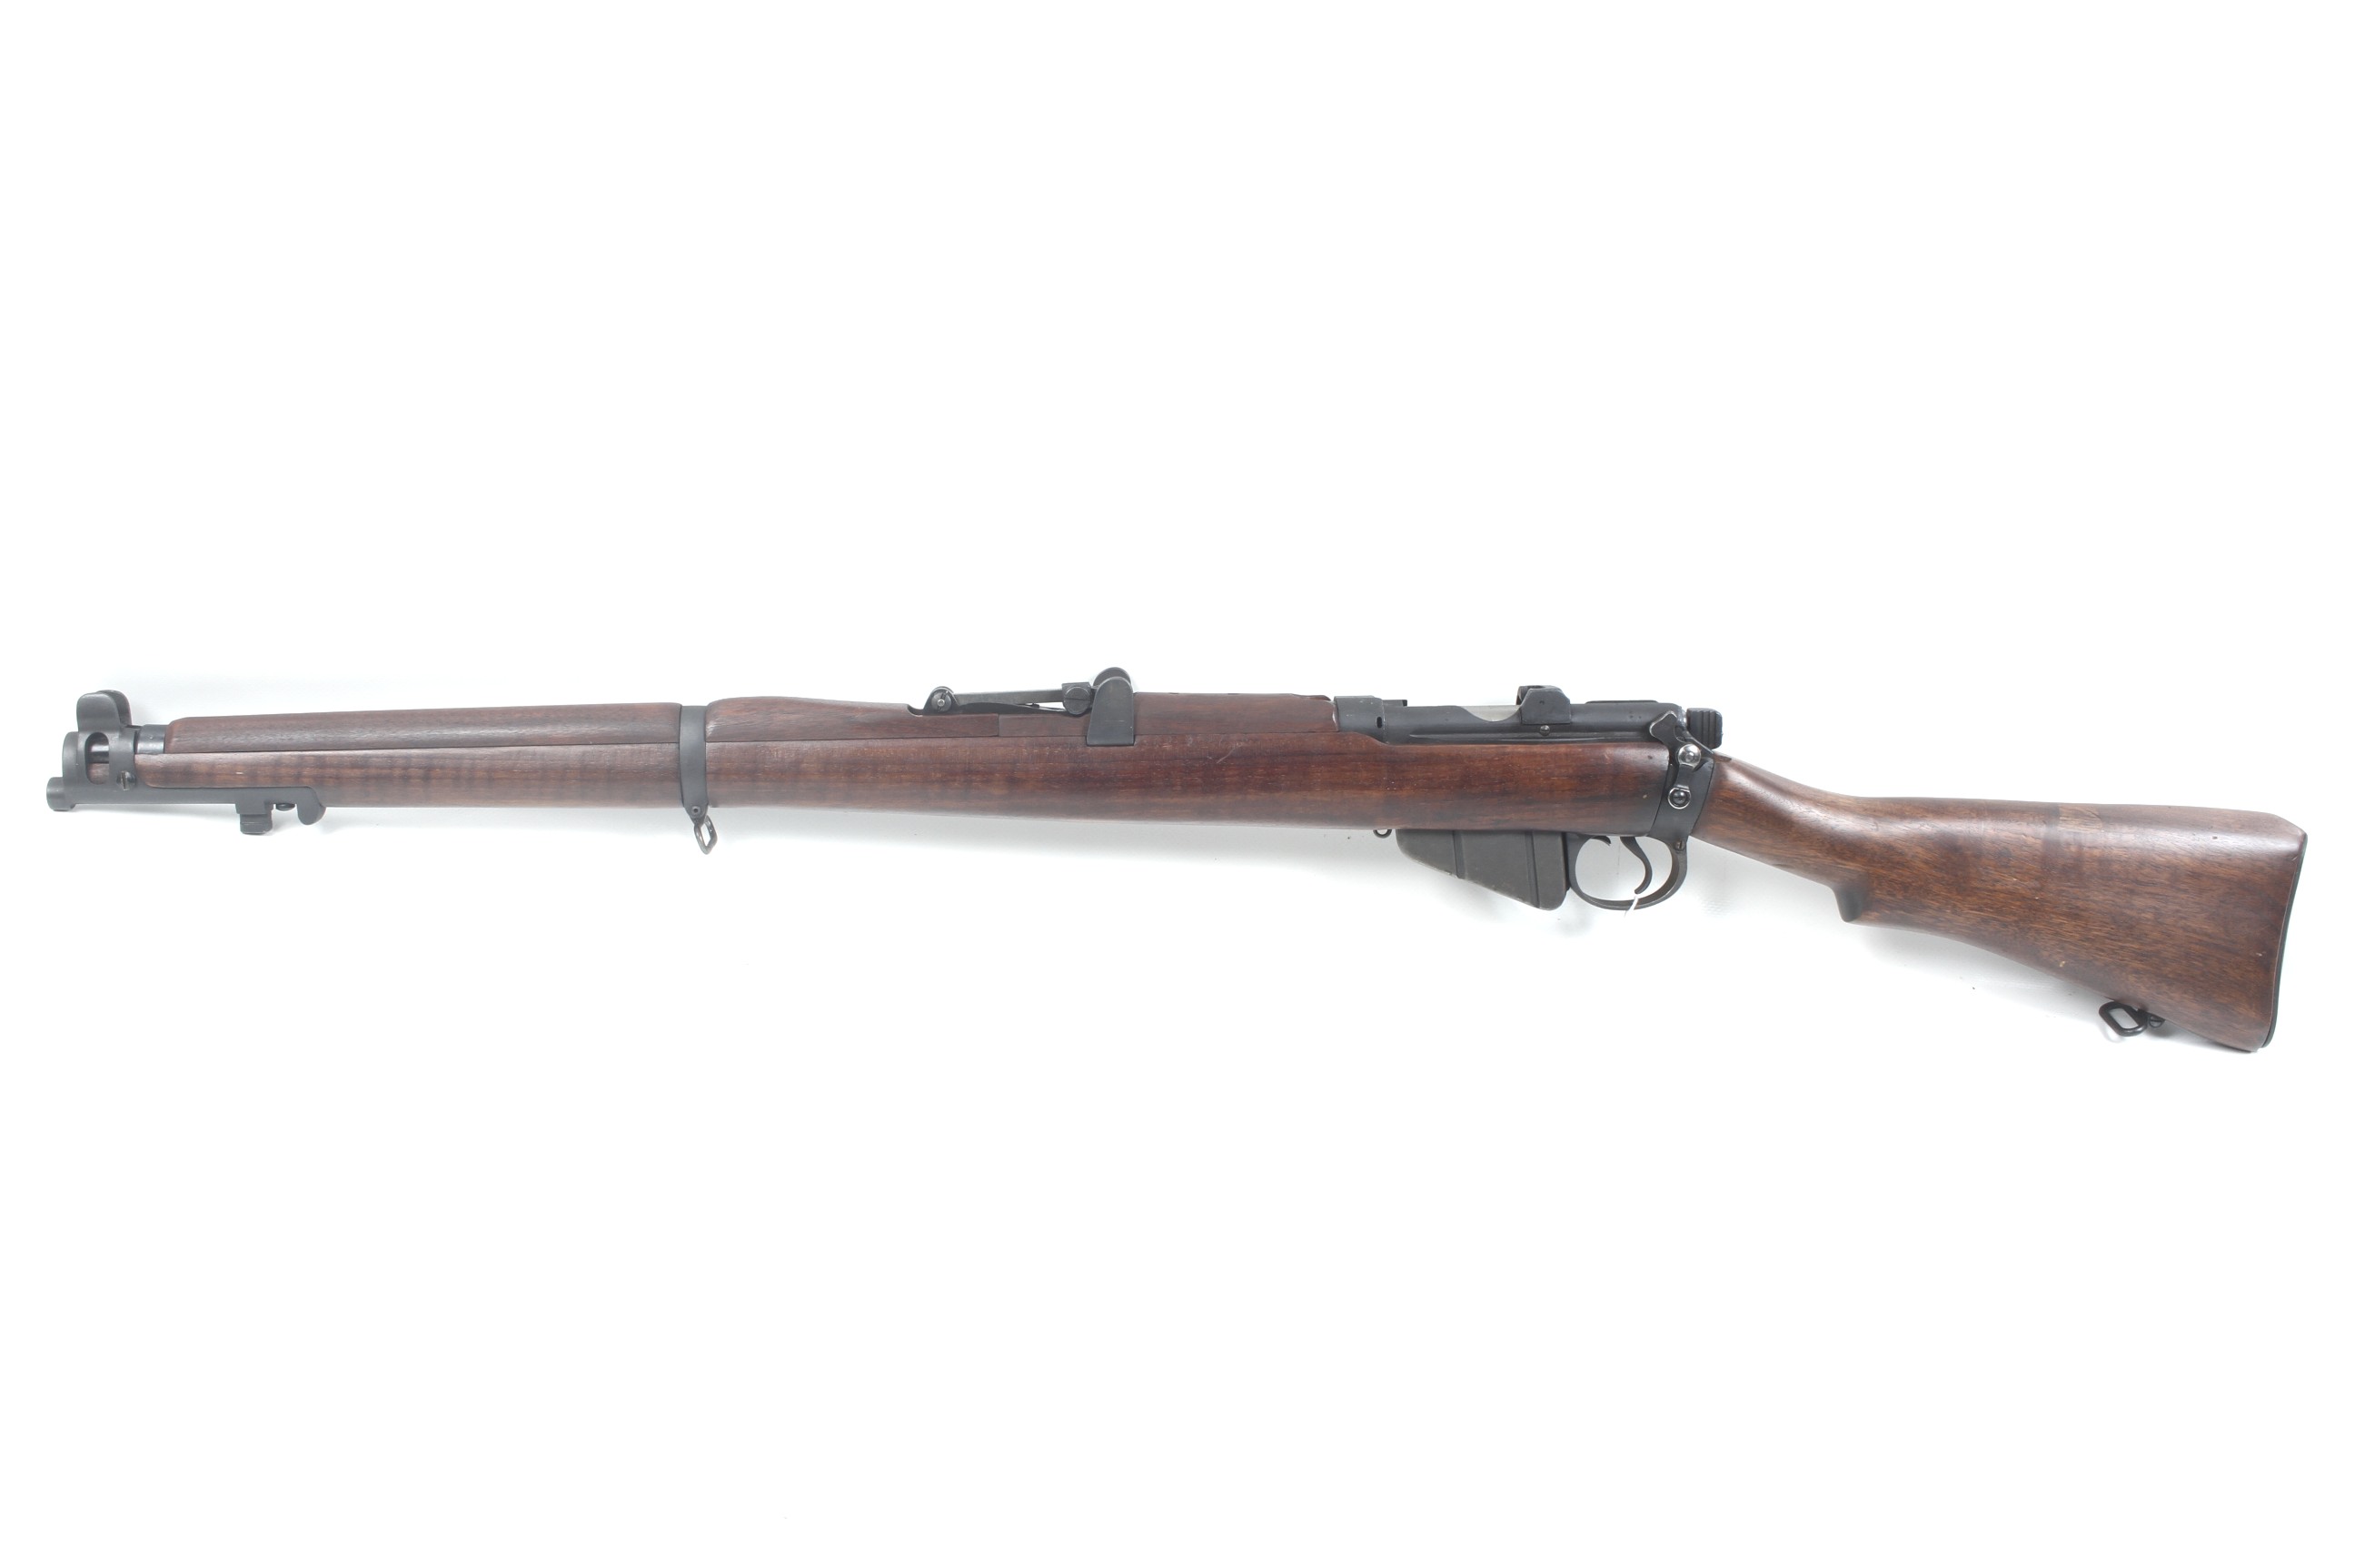 A .303 short mag Lee Enfield bolt action rifle. - Image 2 of 3